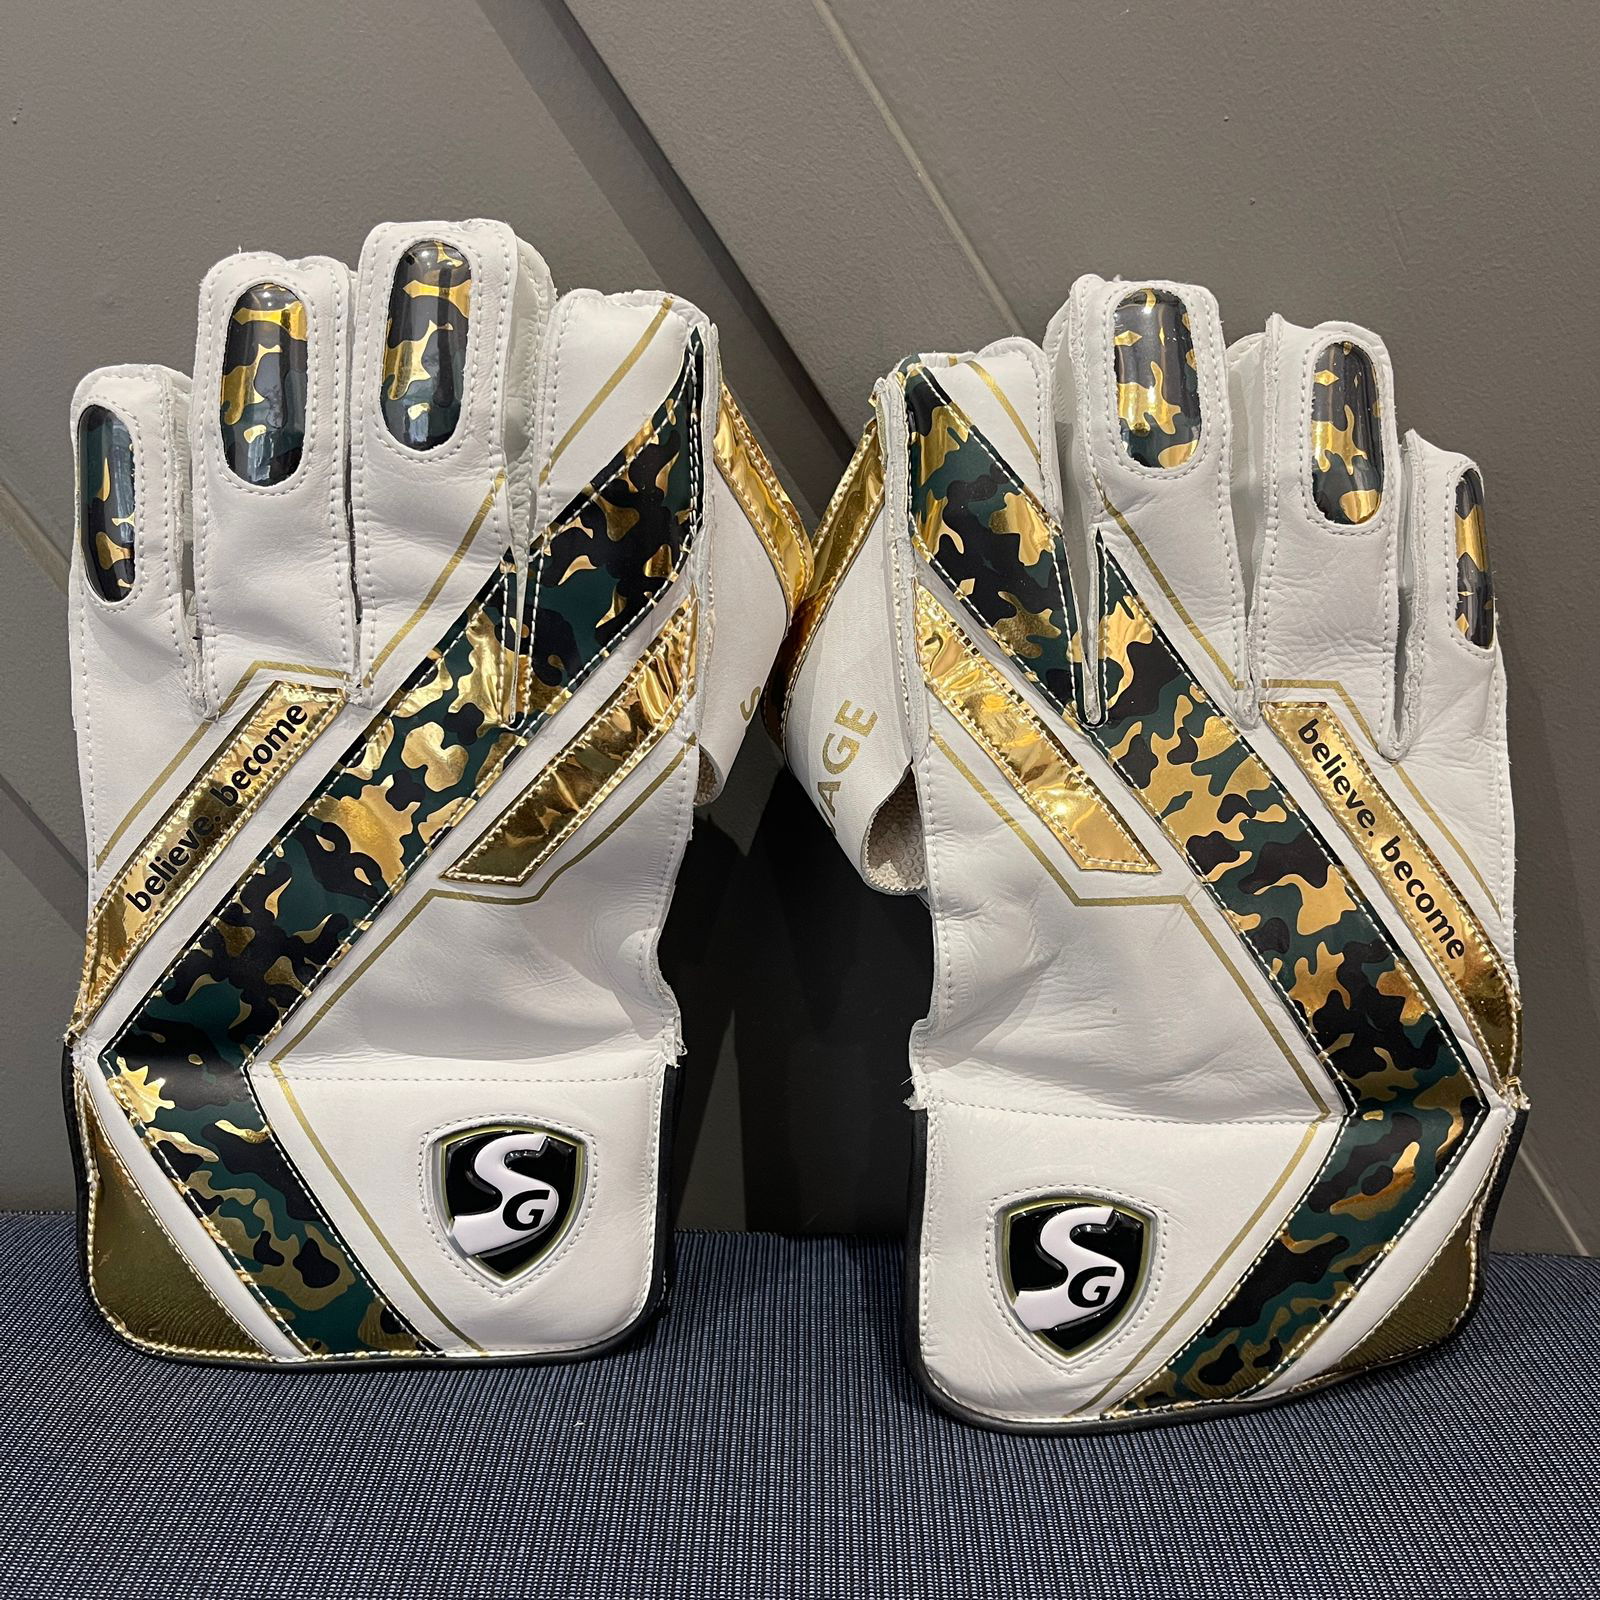 SG Savage edition Wicket keeping Gloves